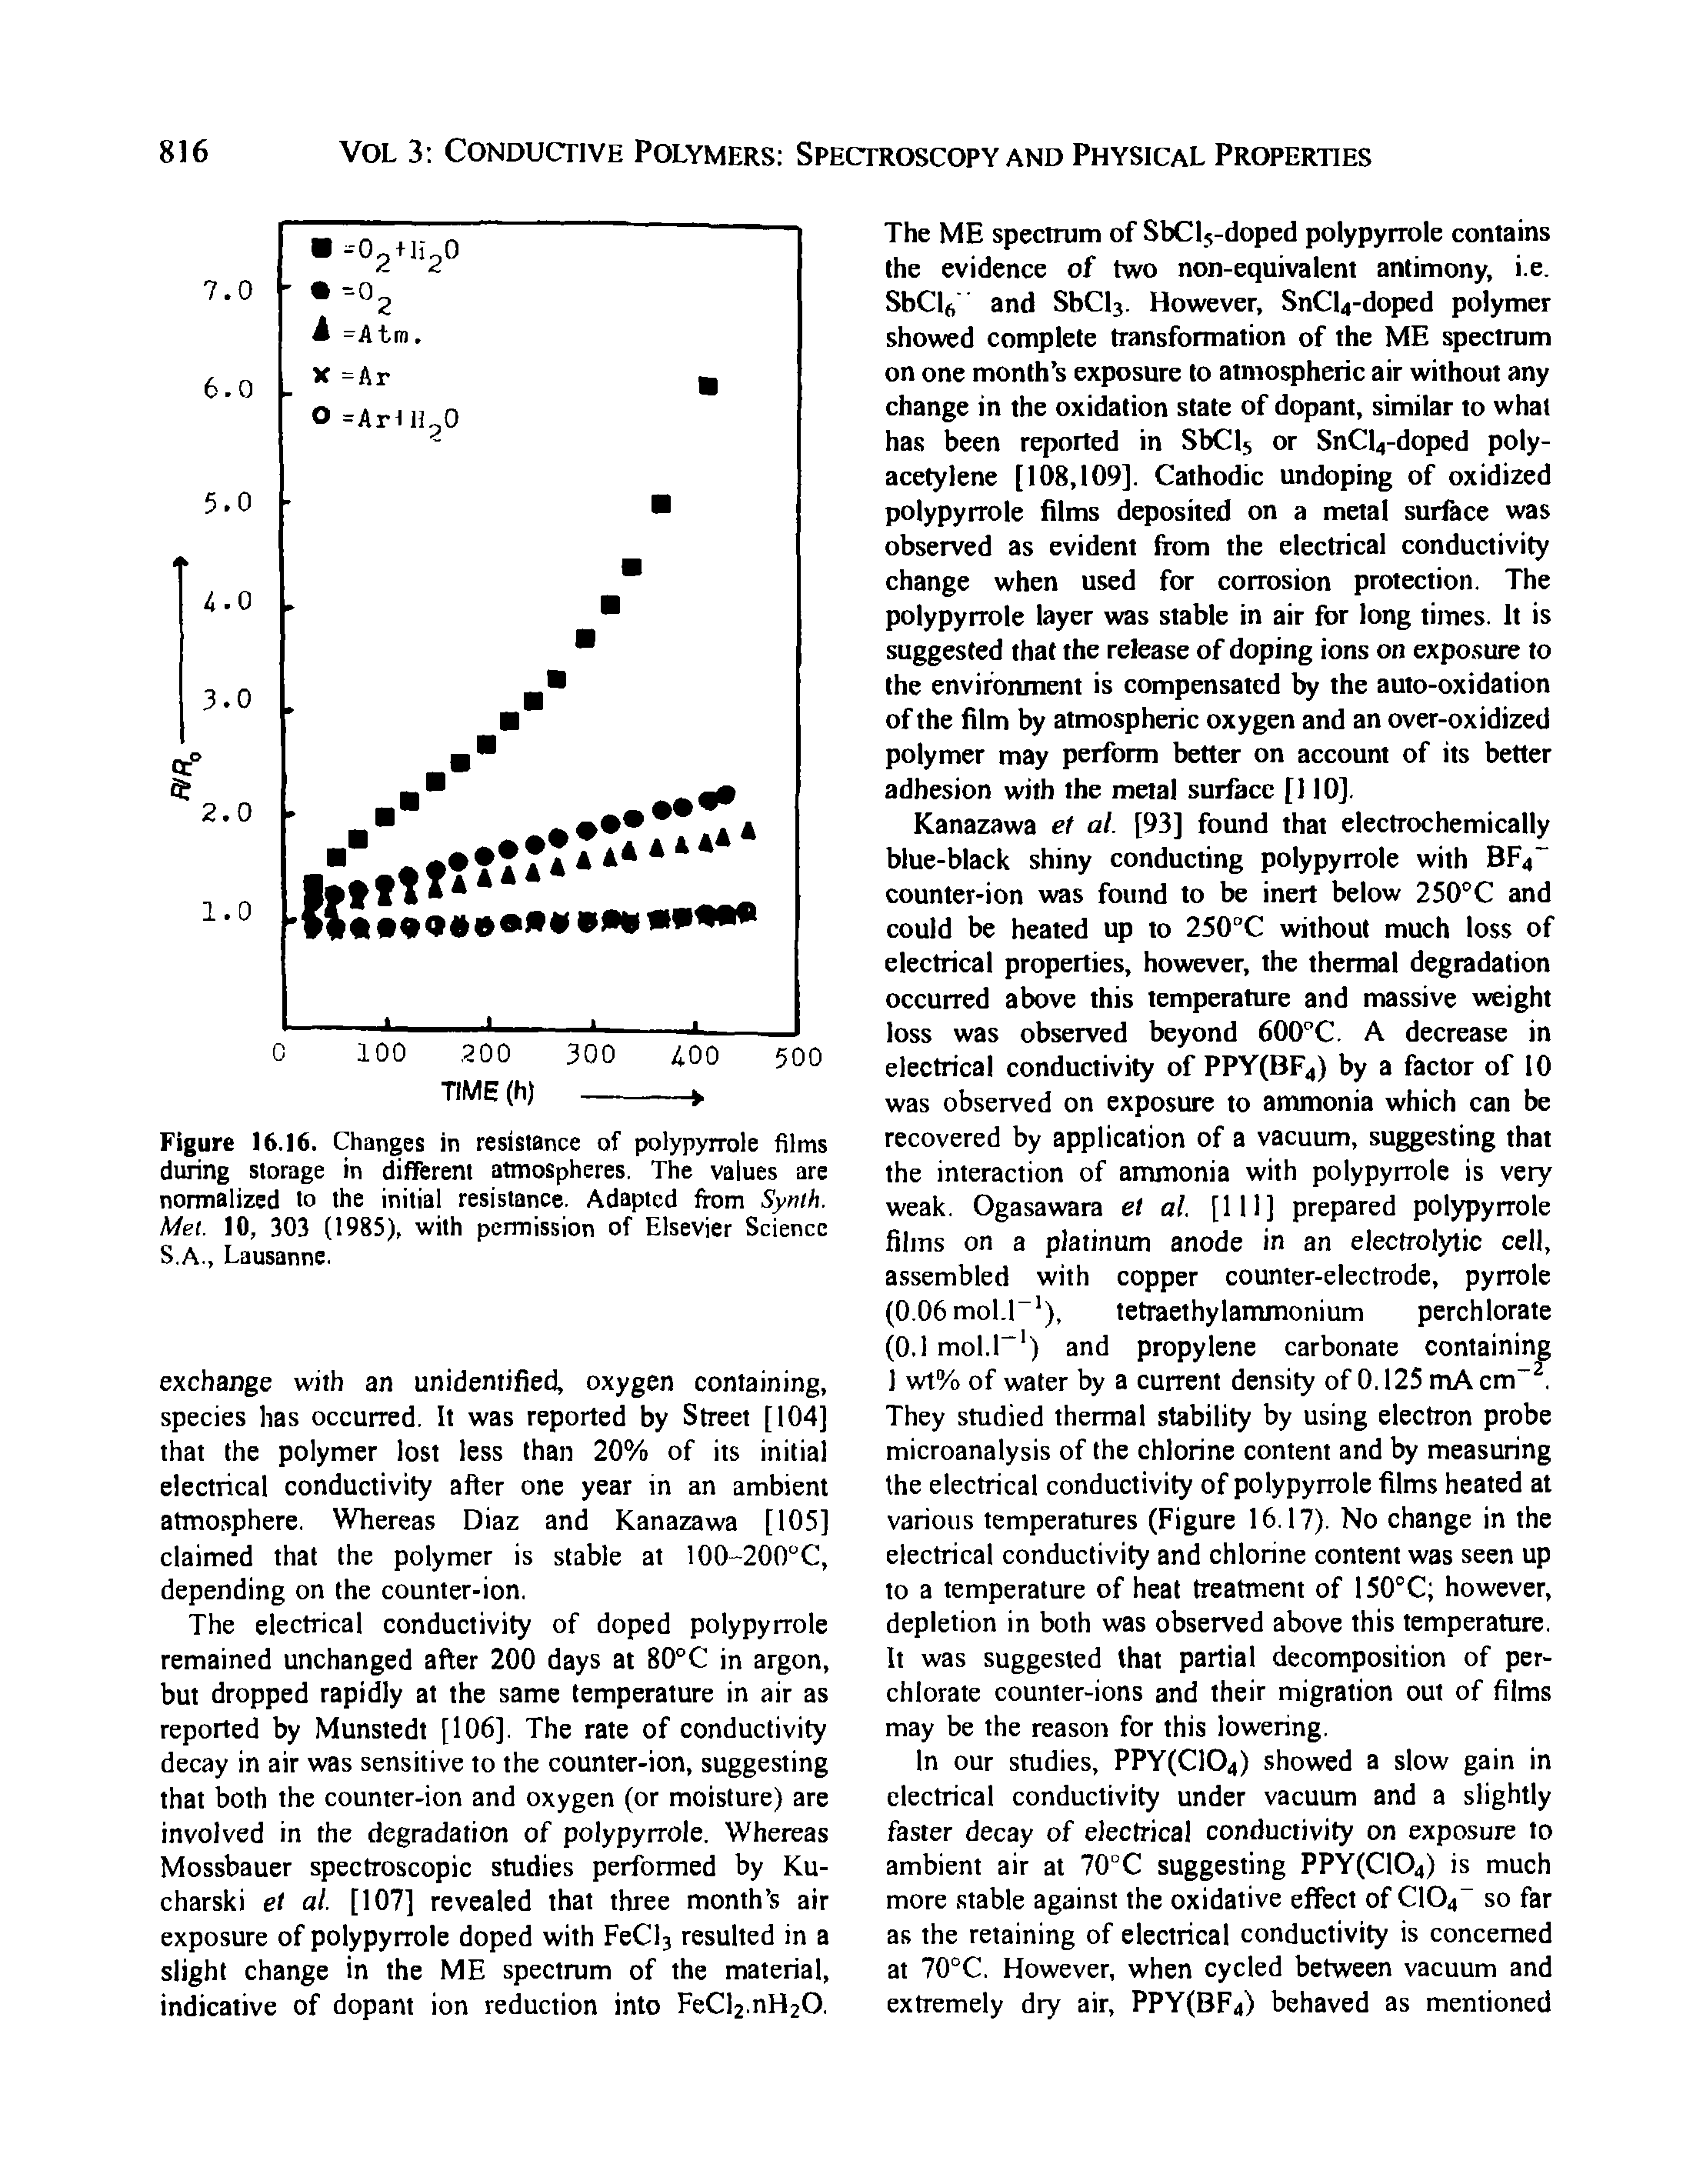 Figure 16.16. Changes in resistance of polypyrrole films during storage in different atmospheres. The values are normalized to the initial resistance. Adapted from Synih. Met. 10, 303 (1985), with permission of Elsevier Science S.A., Lausanne.